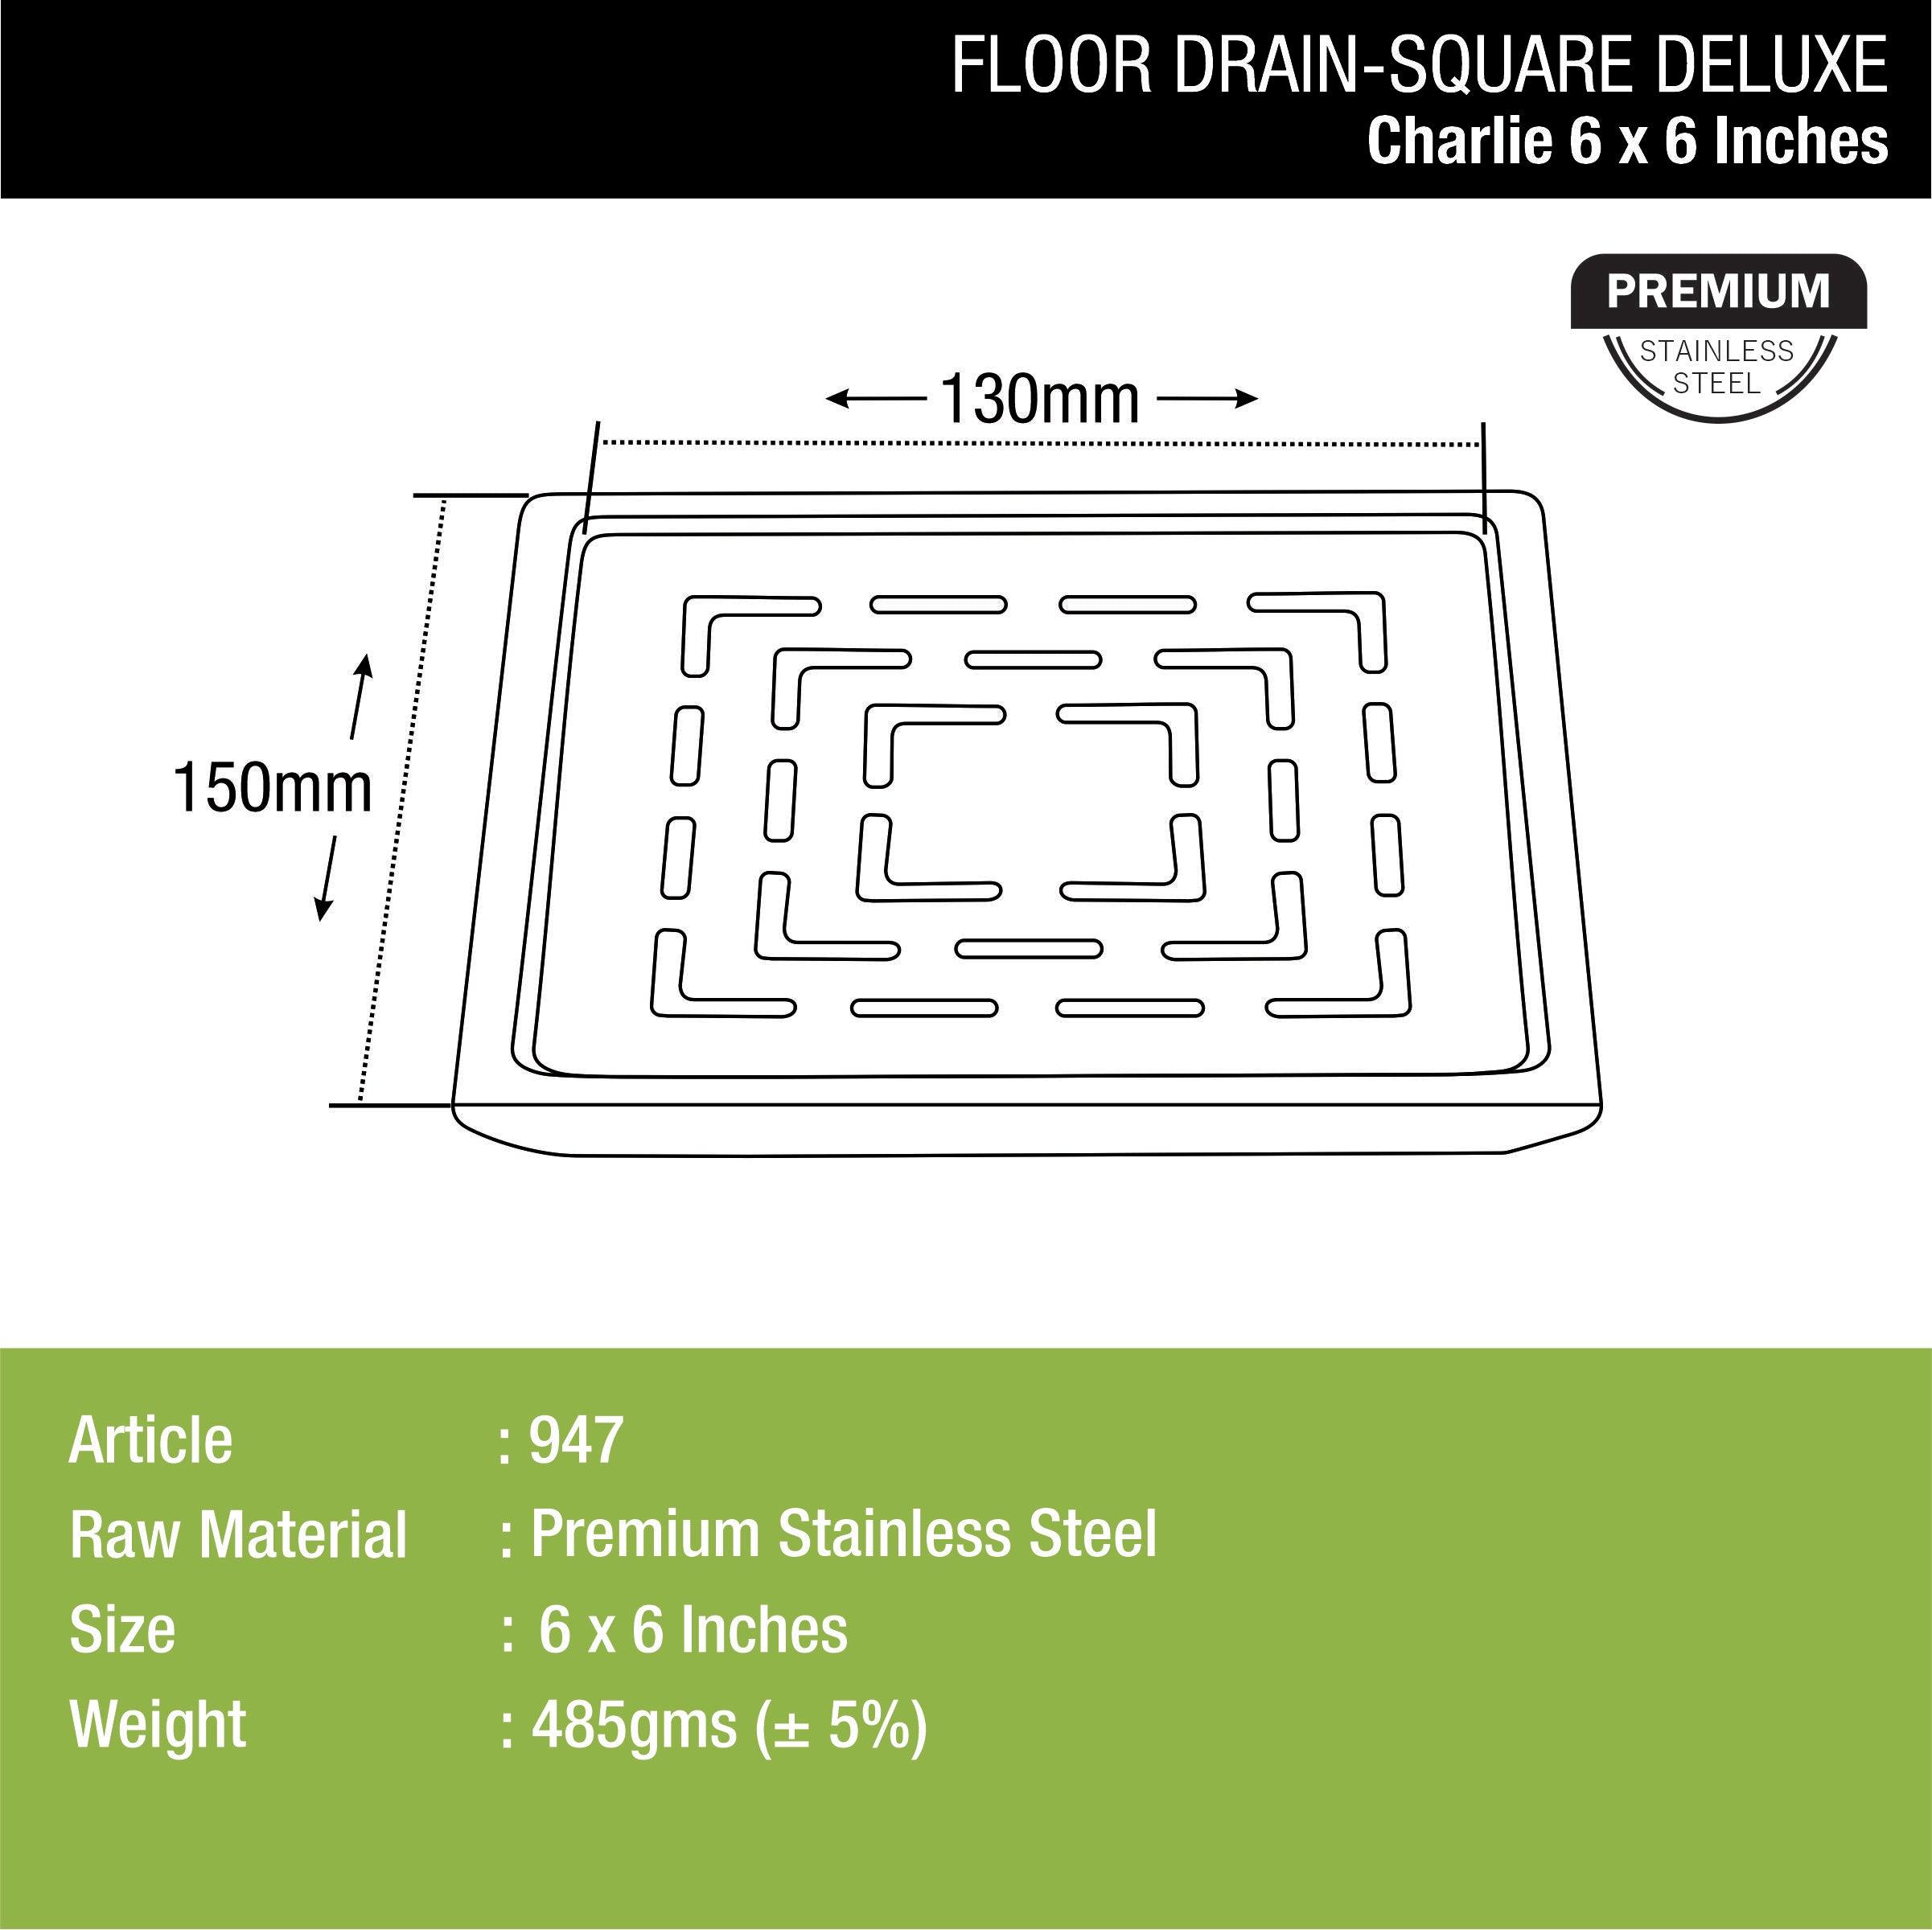 Charlie Deluxe Square Floor Drain (6 x 6 Inches) dimensions and sizes